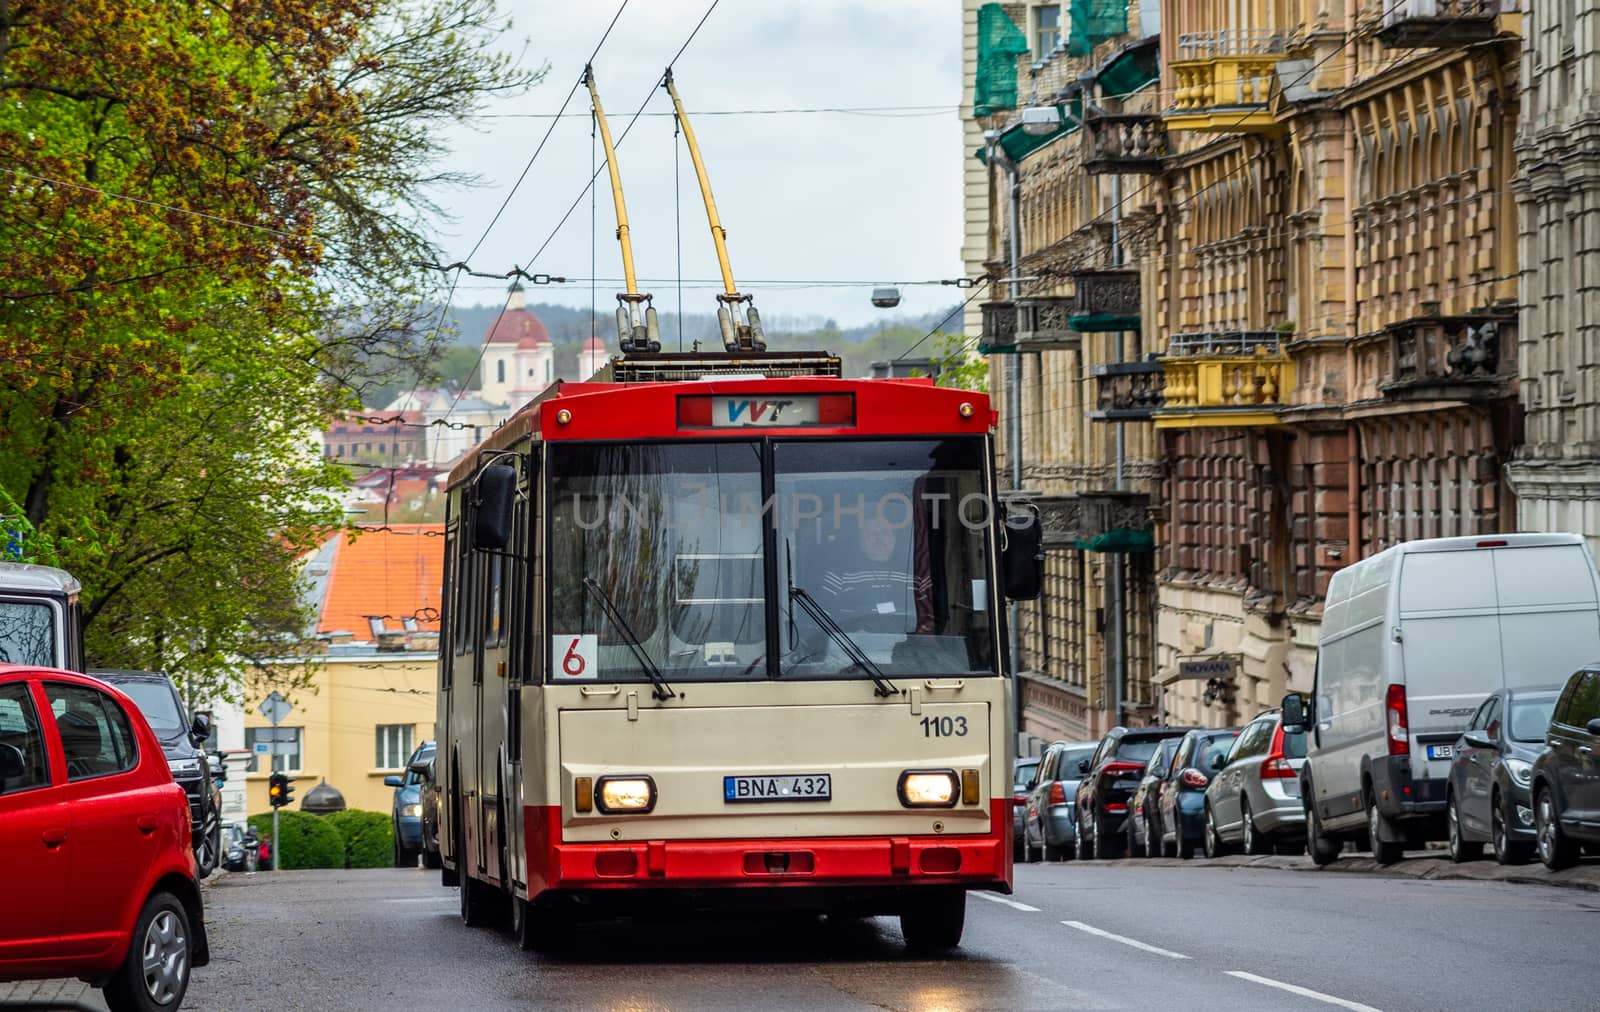 April 27, 2018 Vilnius, Lithuania. A trolleybus on one of the streets in Vilnius.